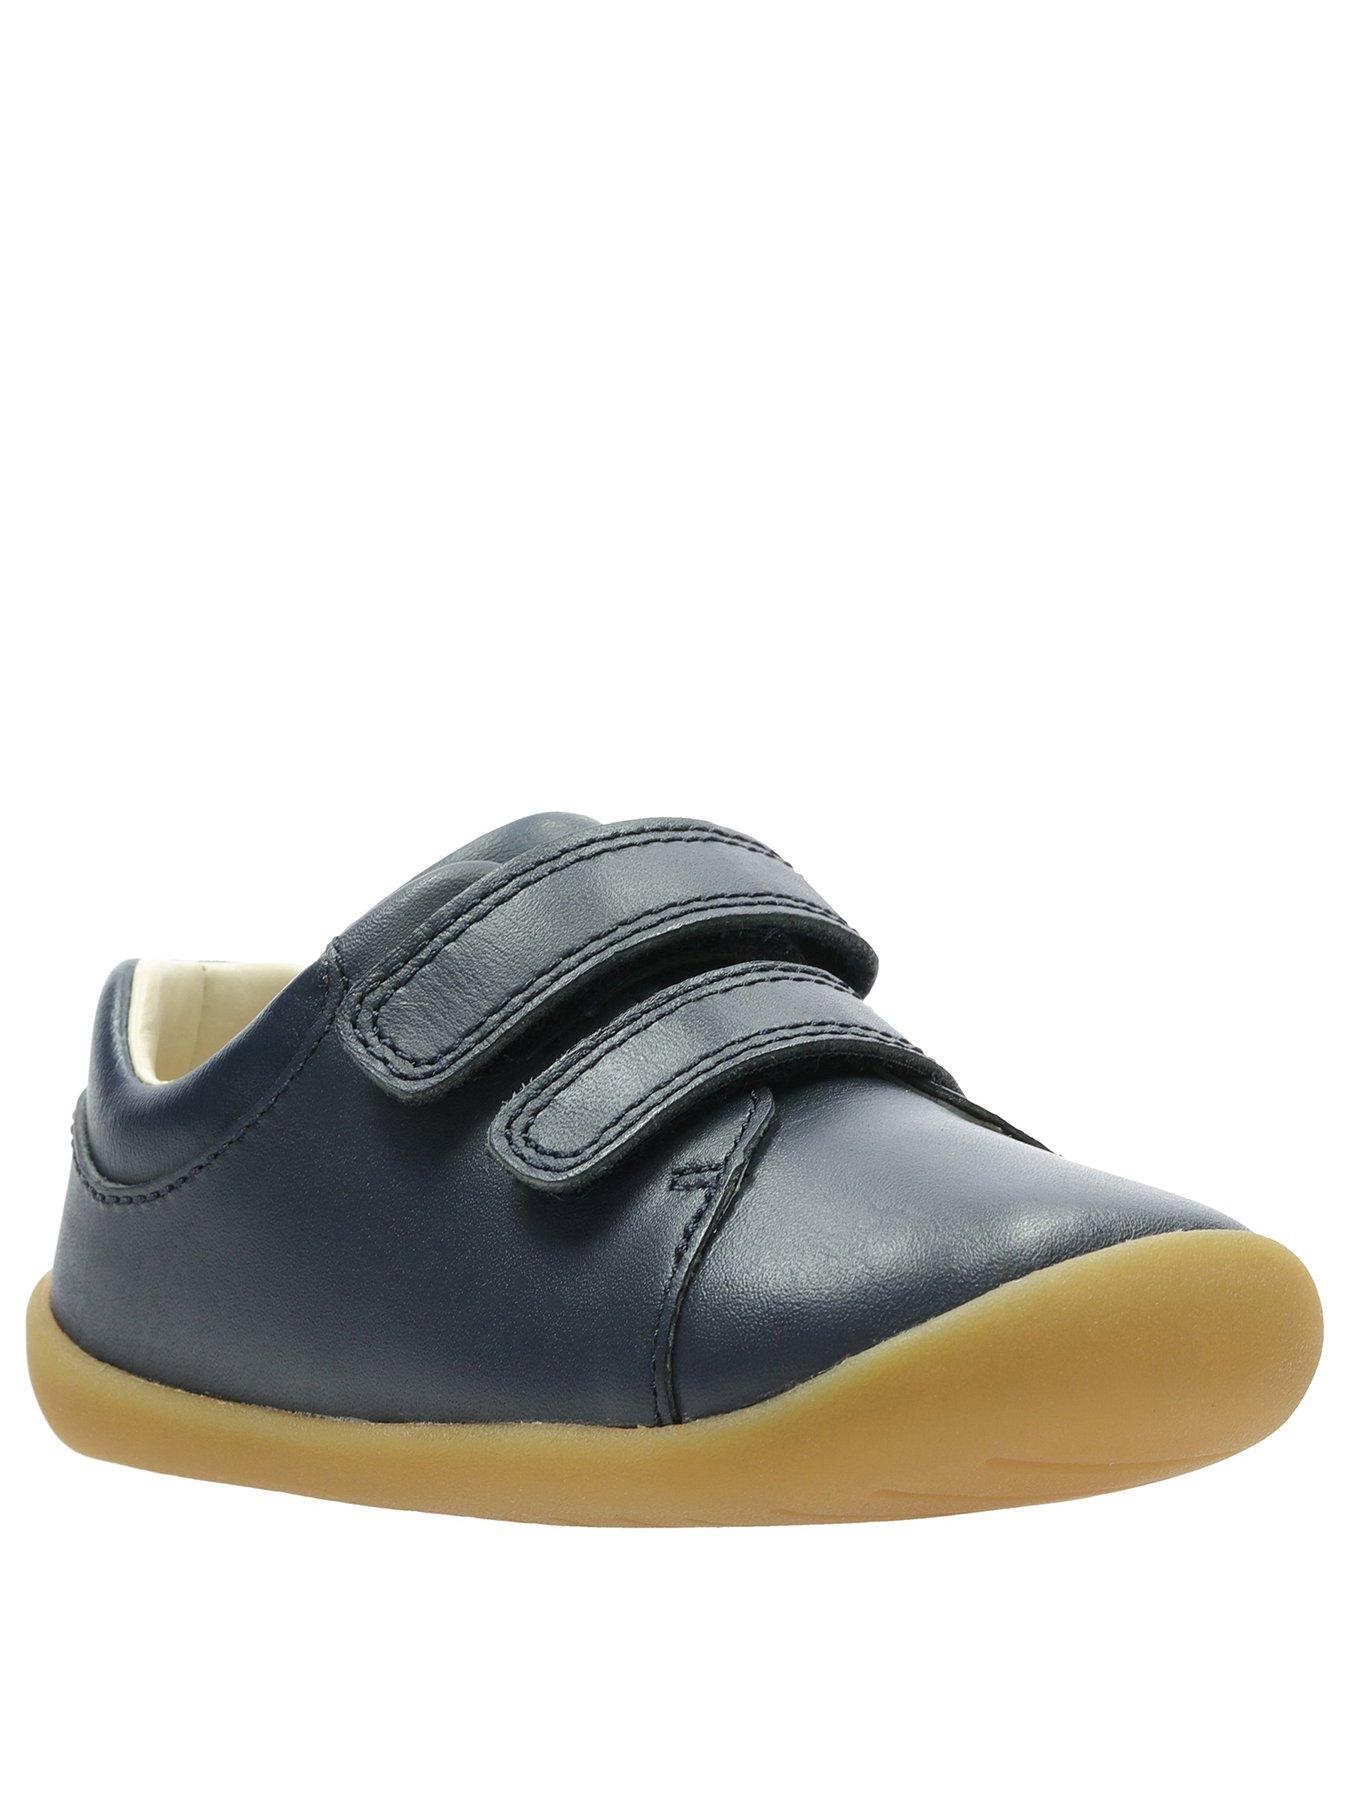 clarks childrens shoes uk